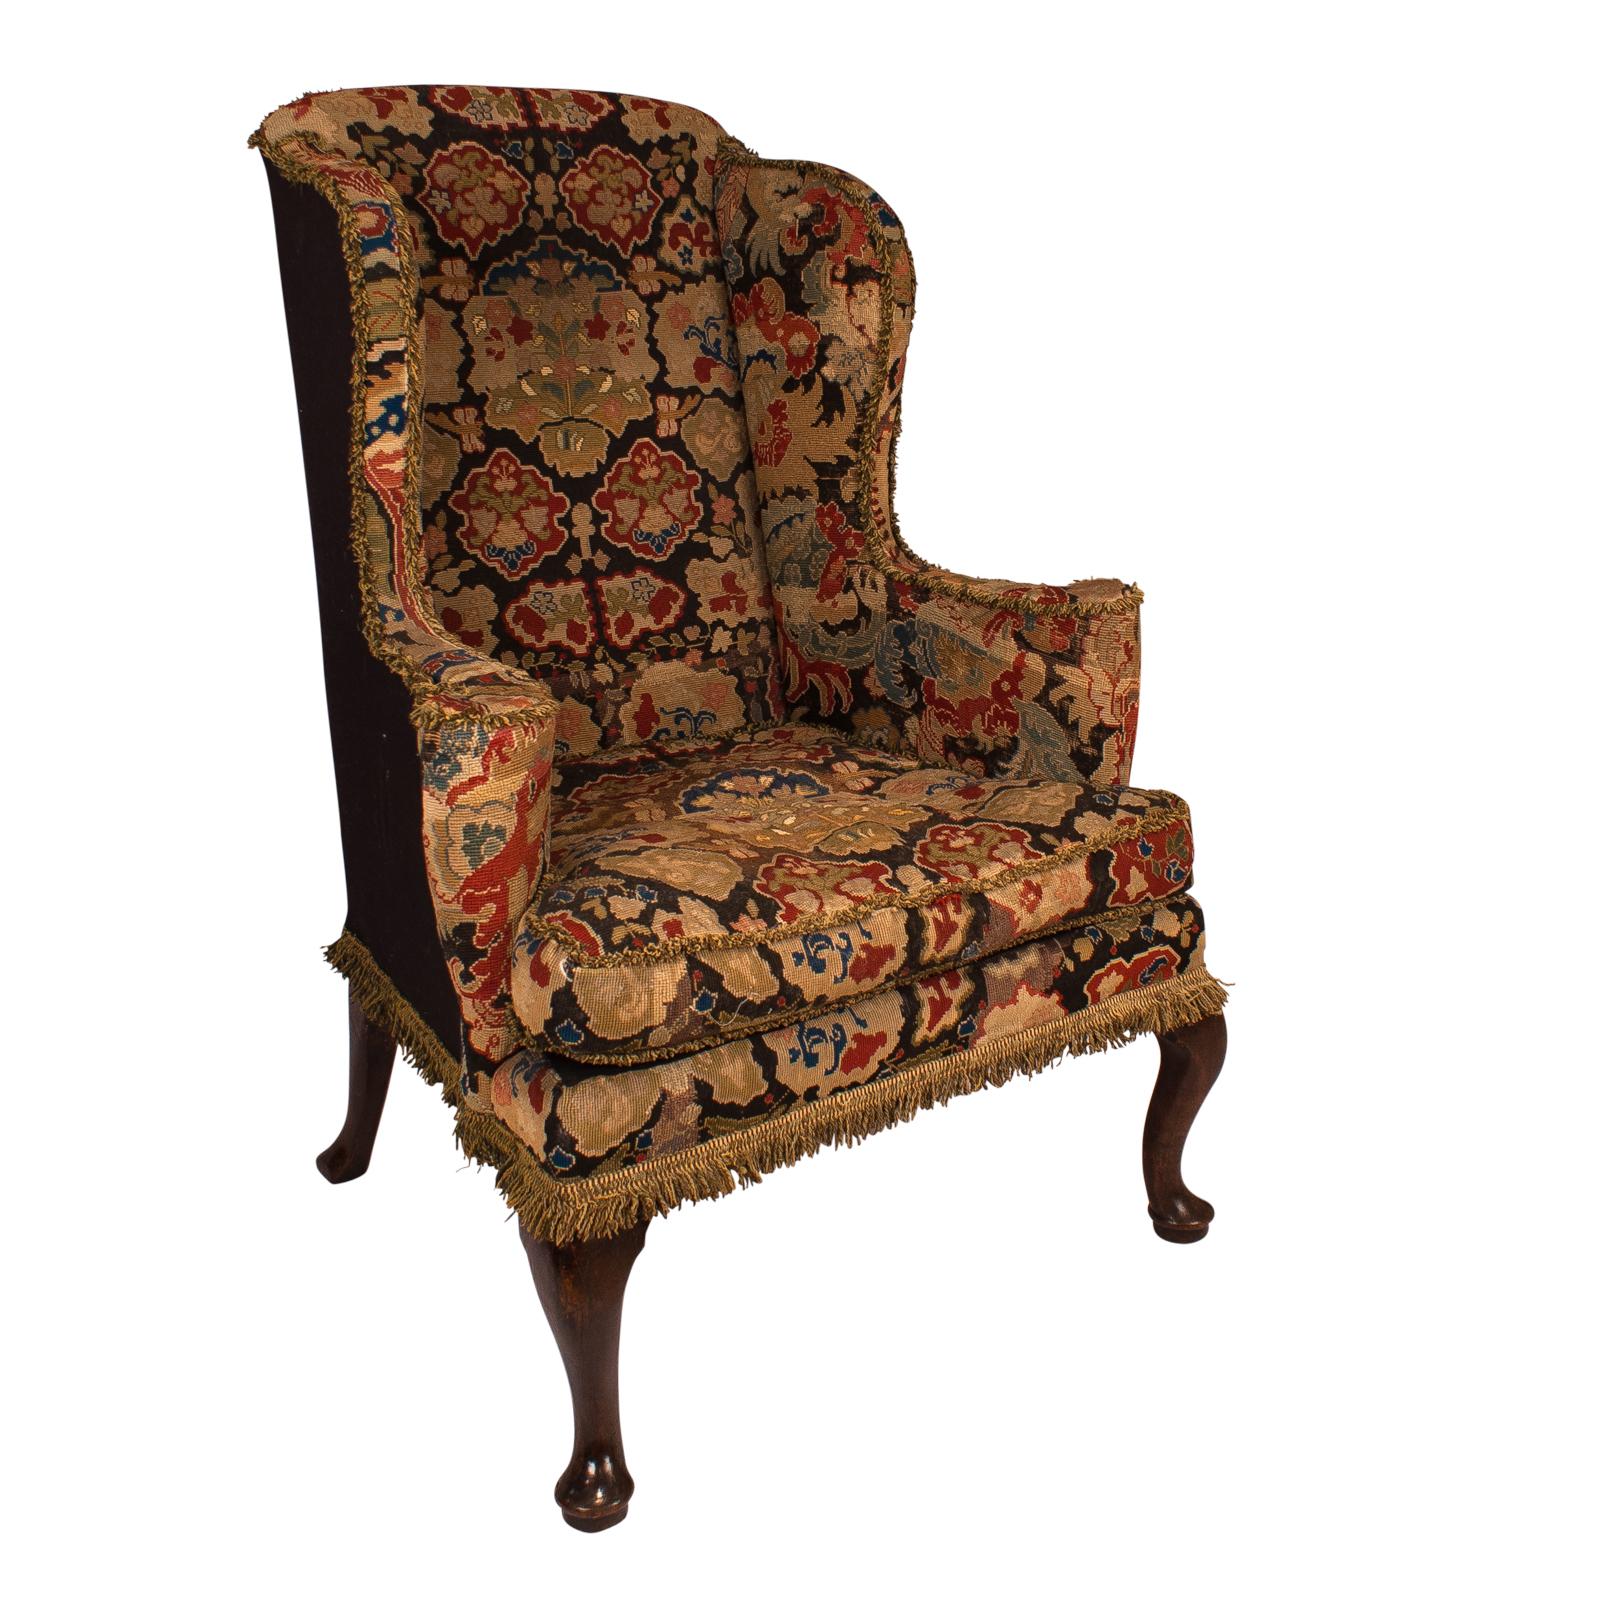 An English George II period wing chair upholstered in tapestry with mahogany legs, circa 1750.